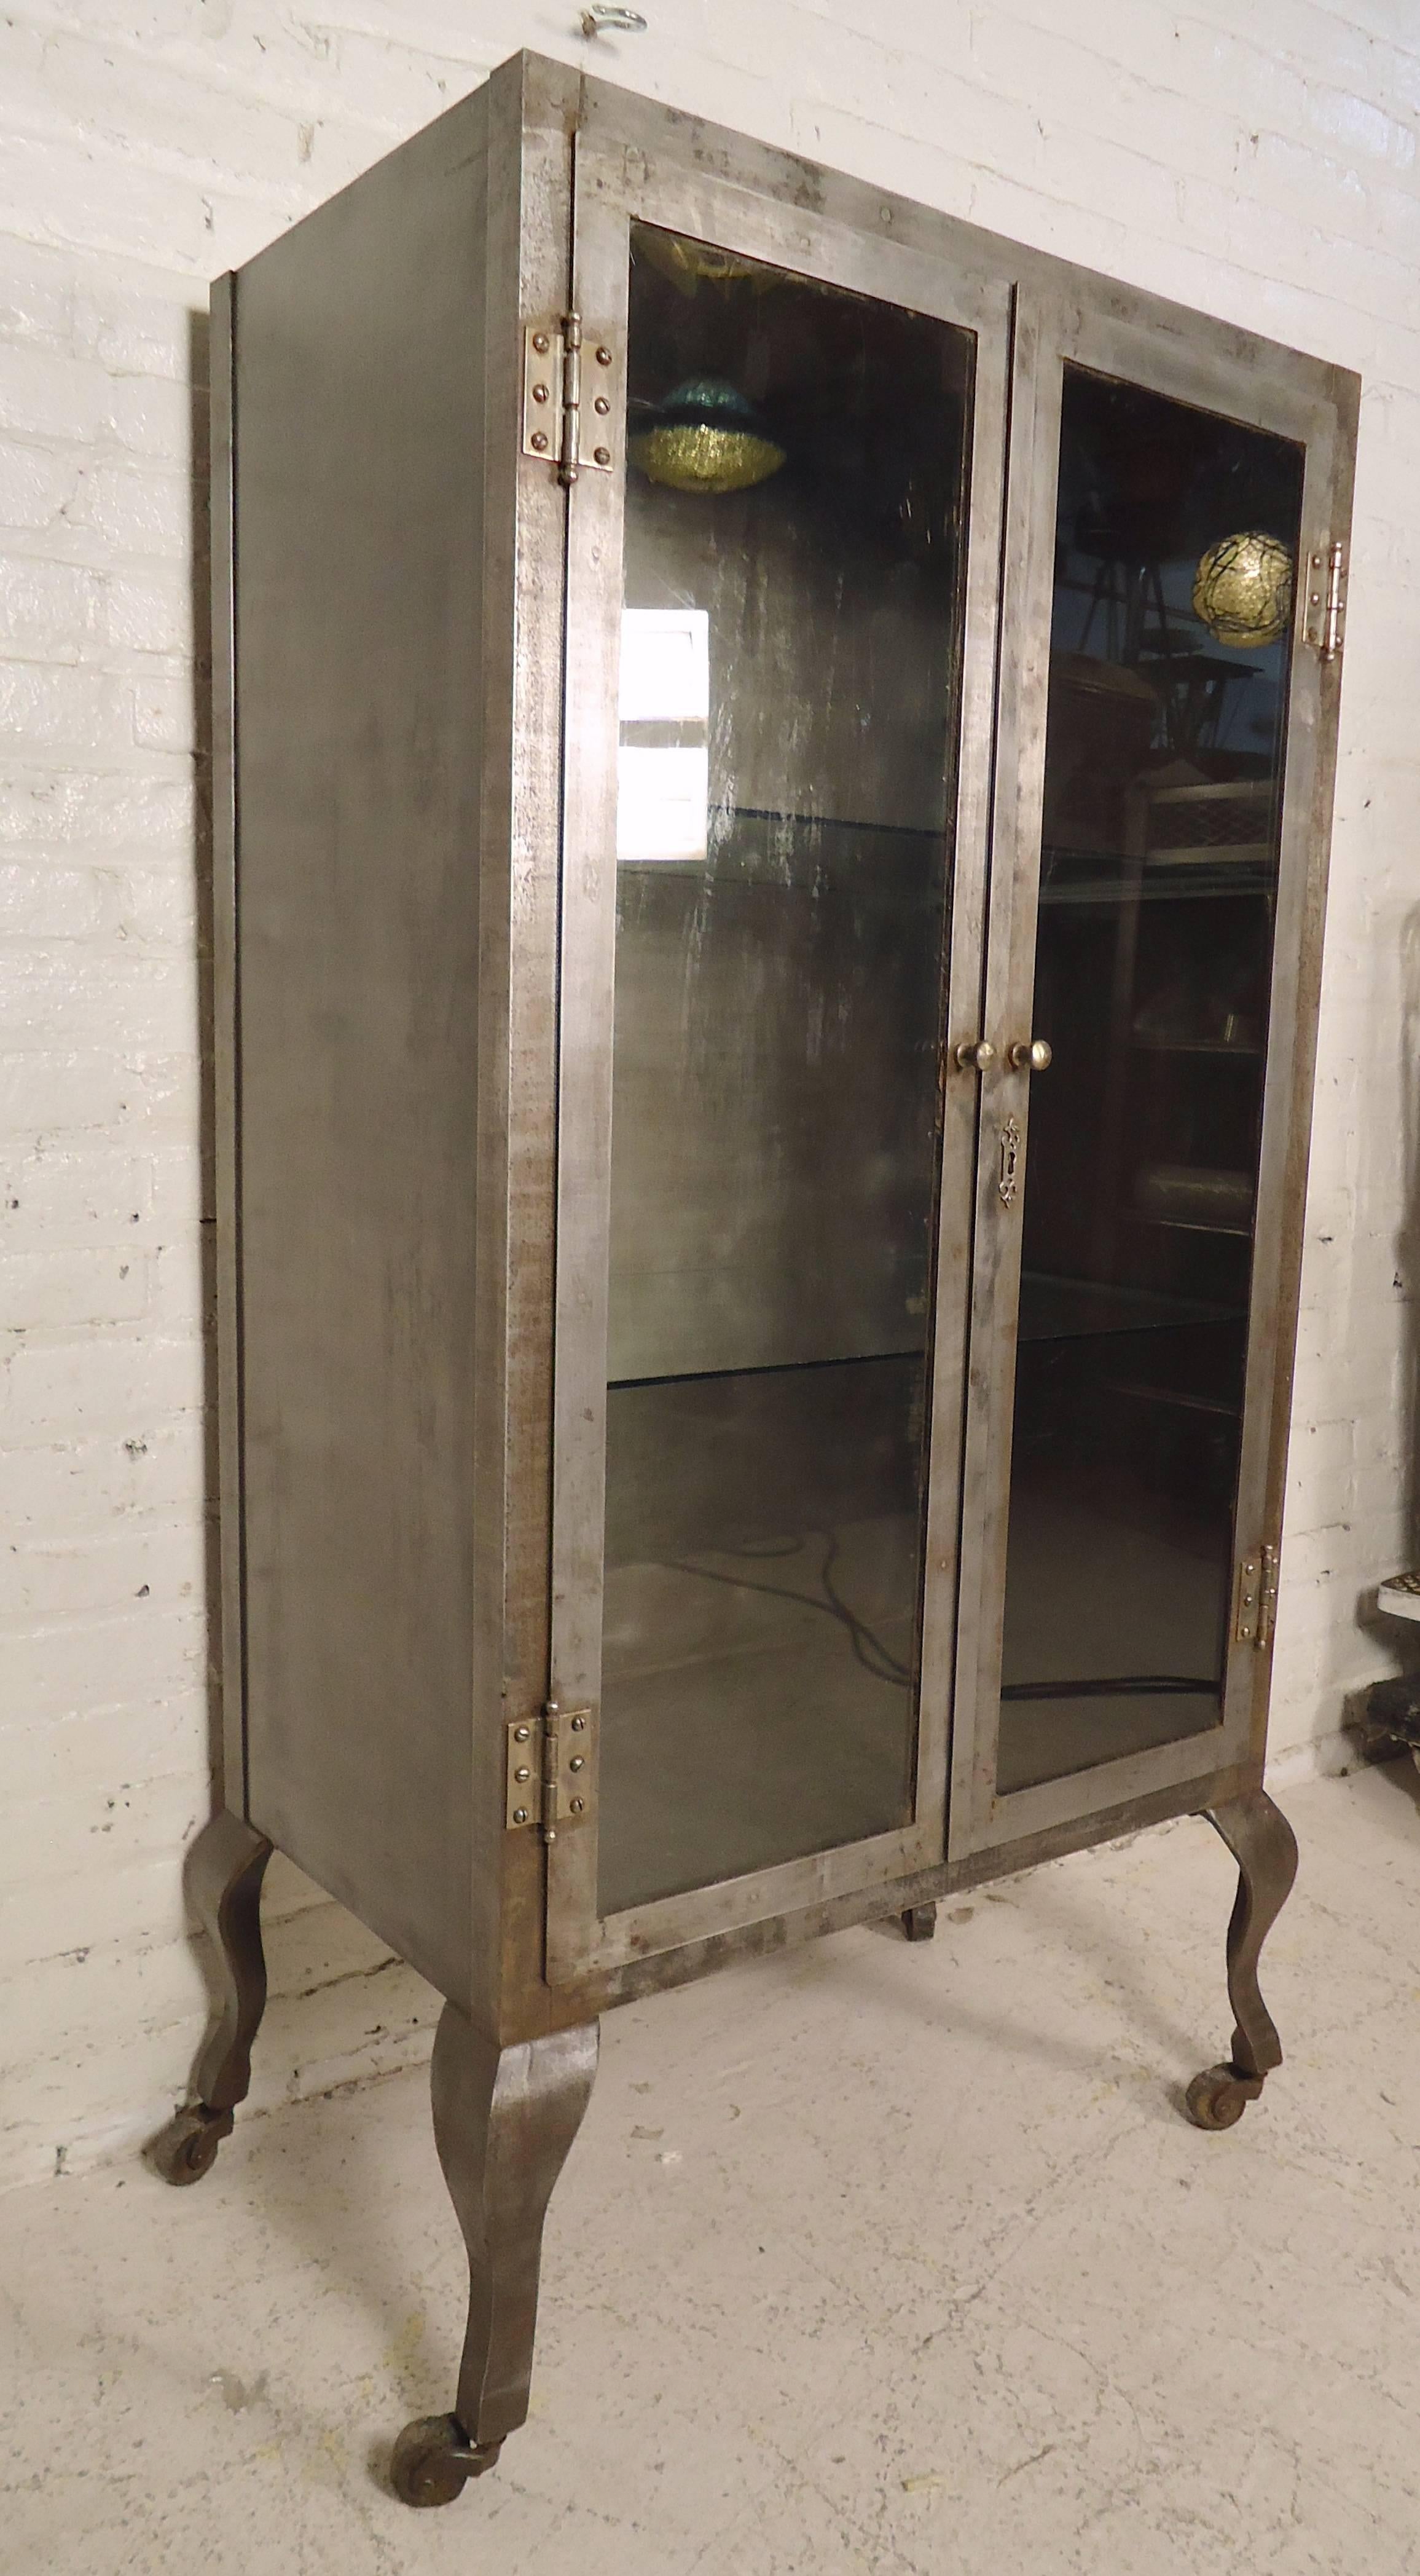 Unique display cabinet restored in an attractive industrial style finish. Two glass doors, two glass shelves (with space for four), rolling casters. Great for bathroom, or kitchen storage.

(Please confirm item location - NY or NJ - with